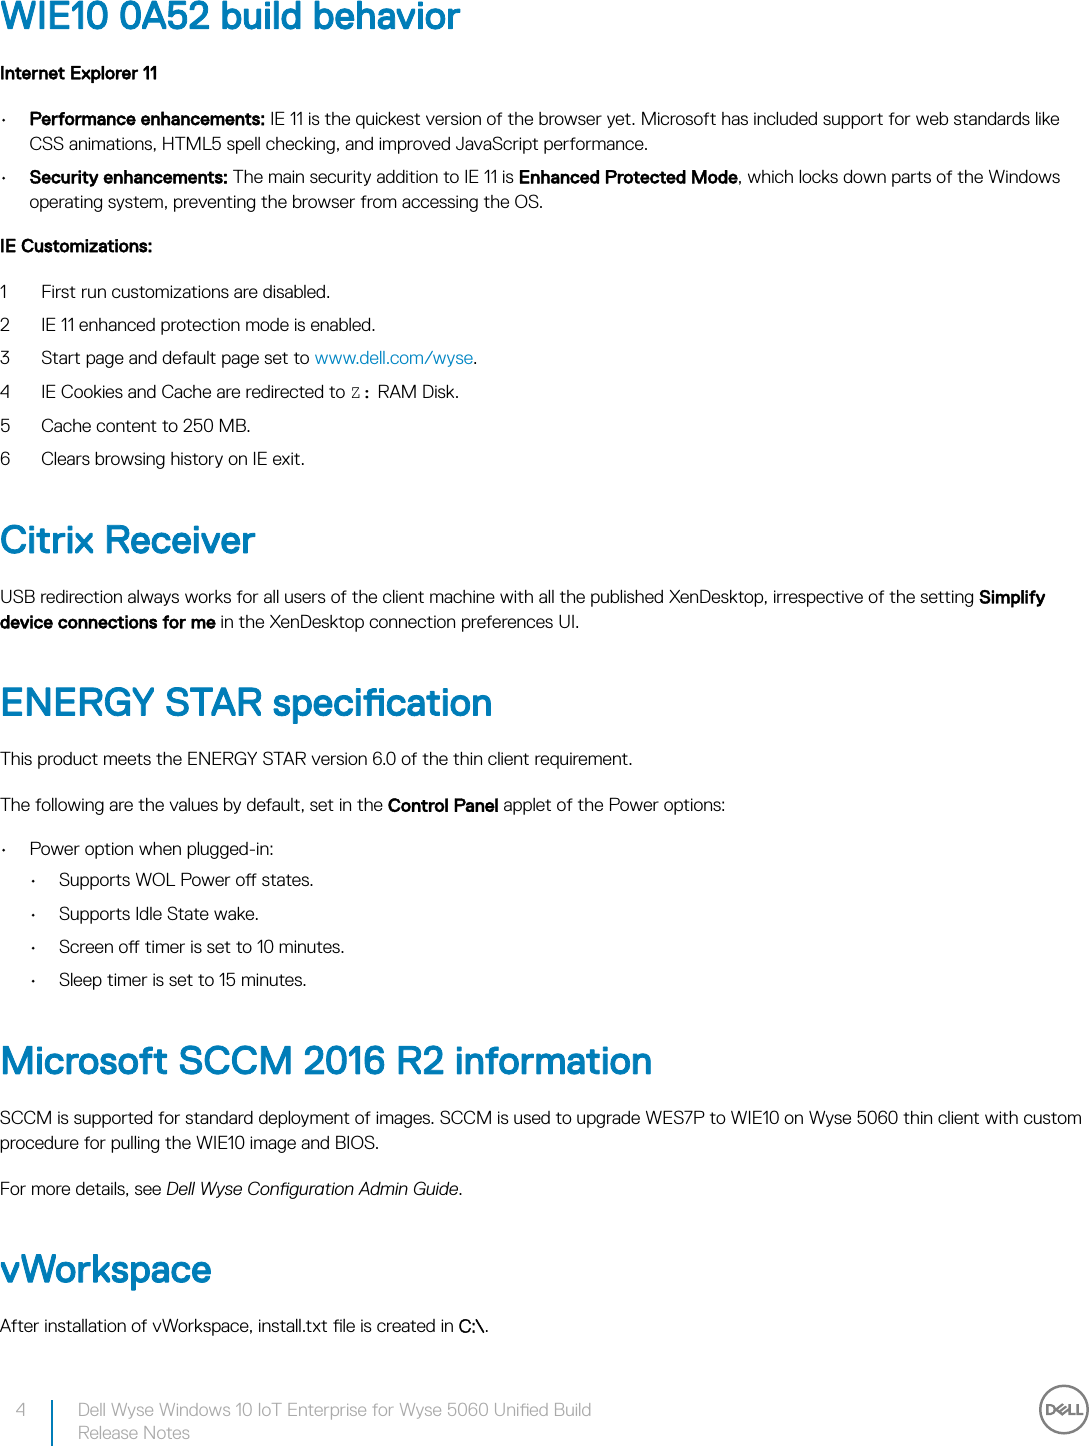 Page 4 of 12 - Dell Wyse-5060-thin-client Wyse Windows 10 IoT Enterprise For 5060 Unified Build Release Notes User Manual  - Io T Notes7 En-us